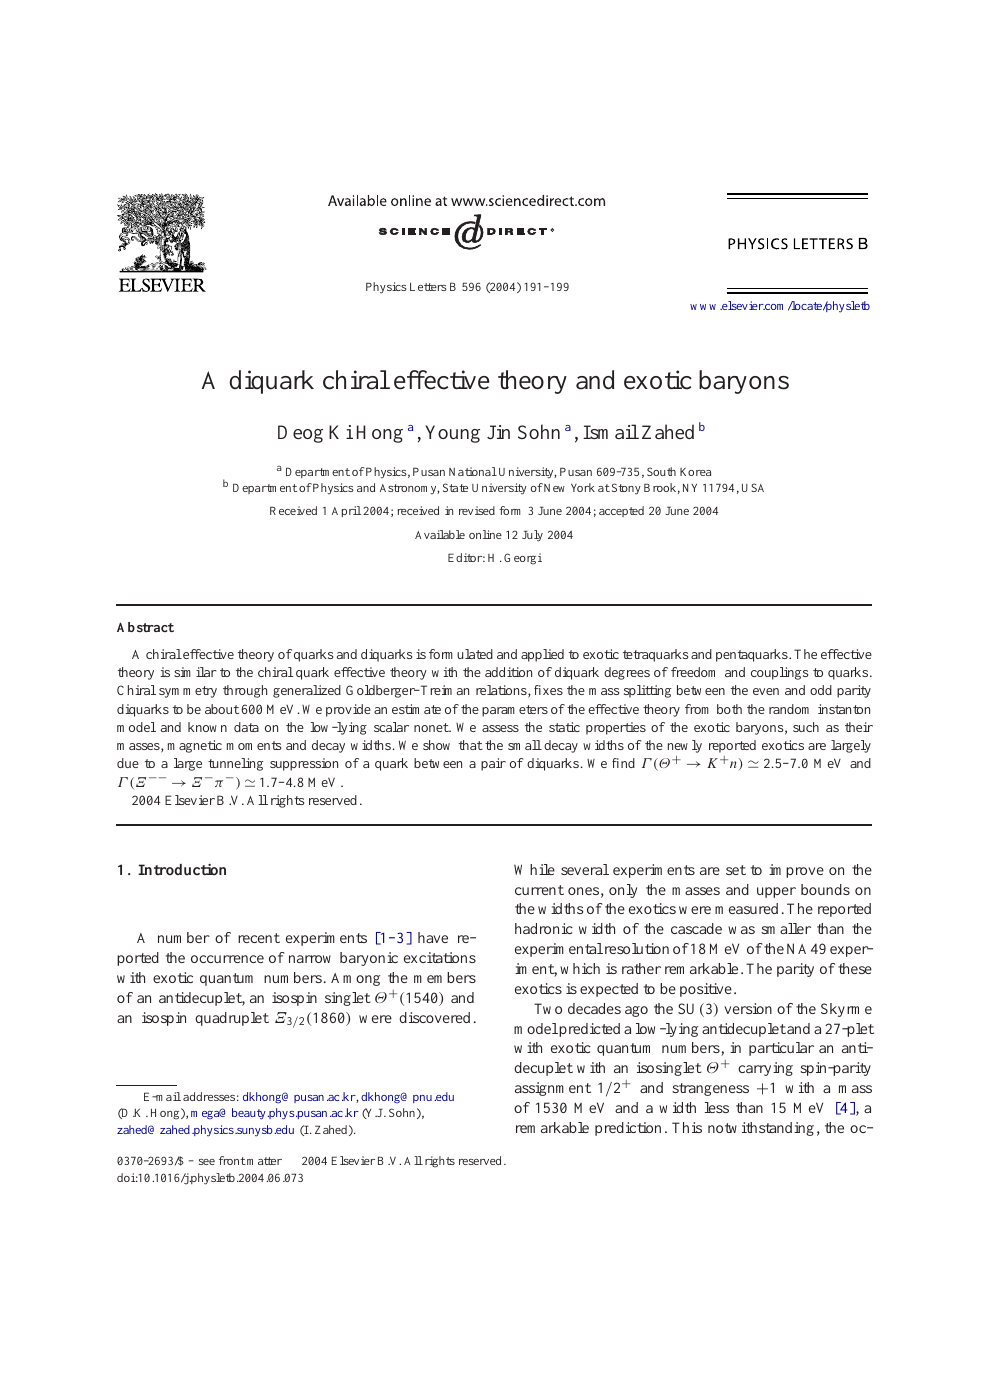 A Diquark Chiral Effective Theory And Exotic Baryons Topic Of Research Paper In Physical Sciences Download Scholarly Article Pdf And Read For Free On Cyberleninka Open Science Hub